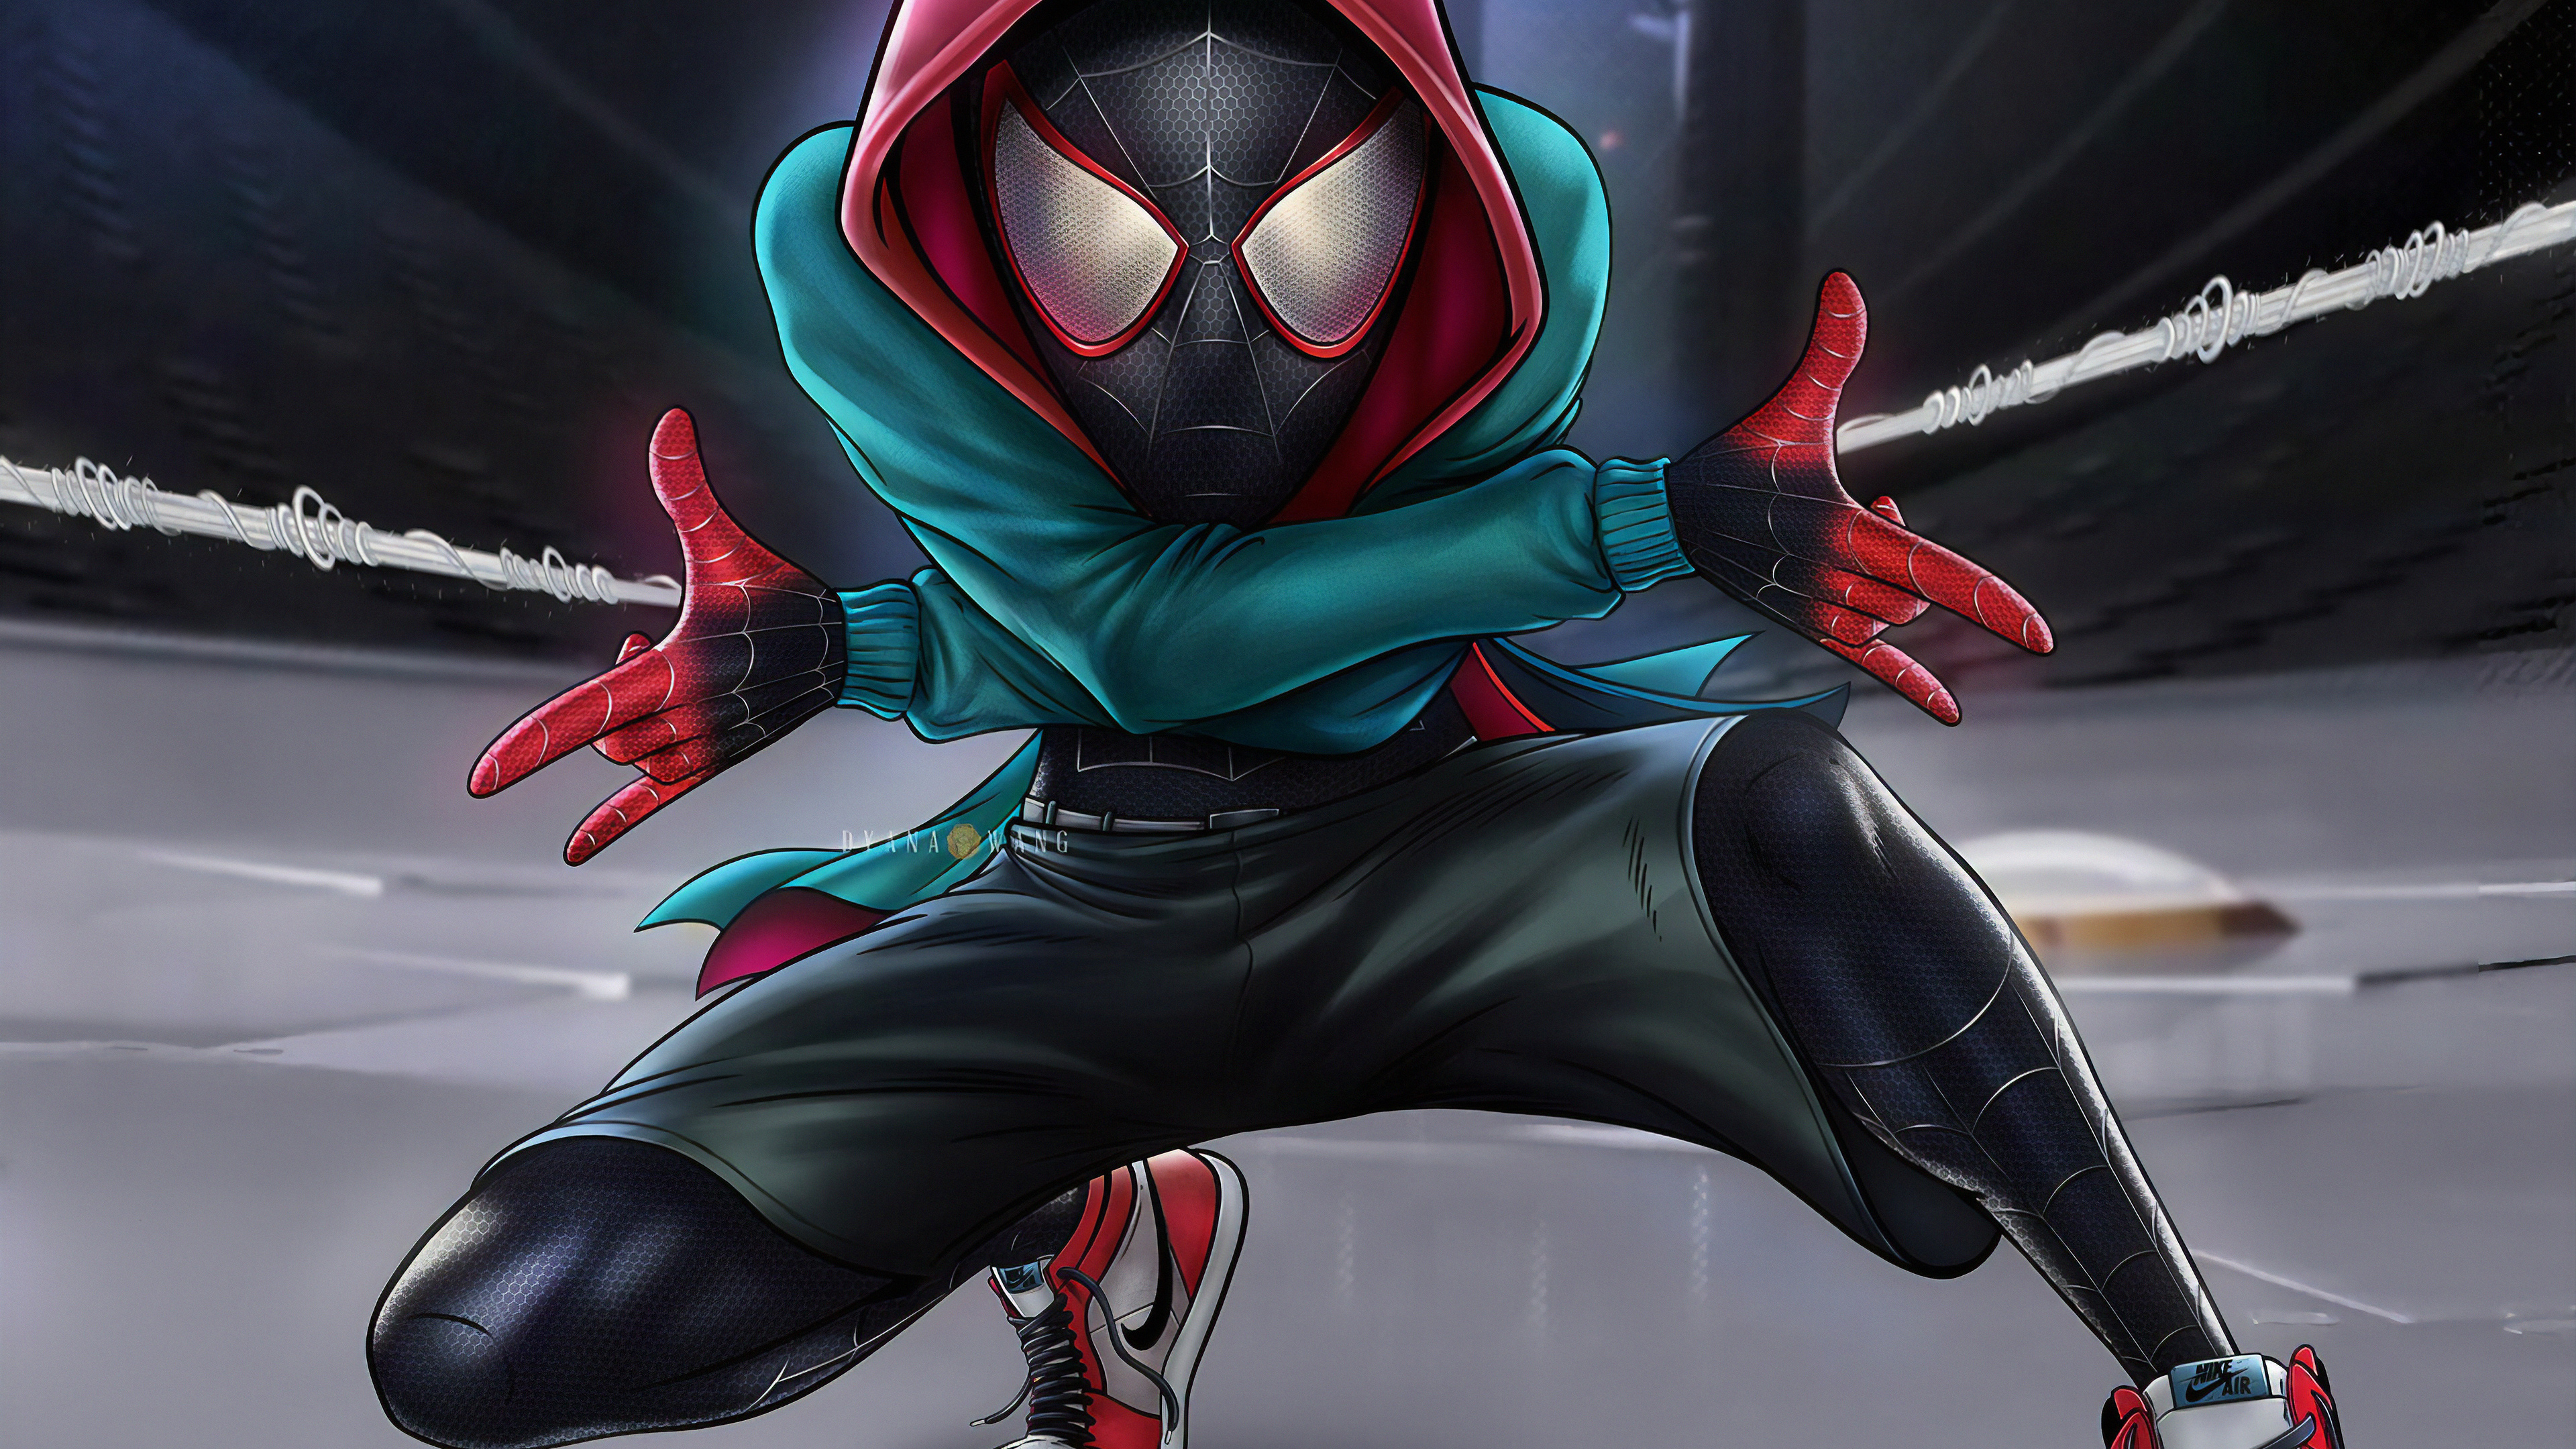 Miles Morales Wallpapers - Top 65 Best Spider Man Miles Morales Backgrounds